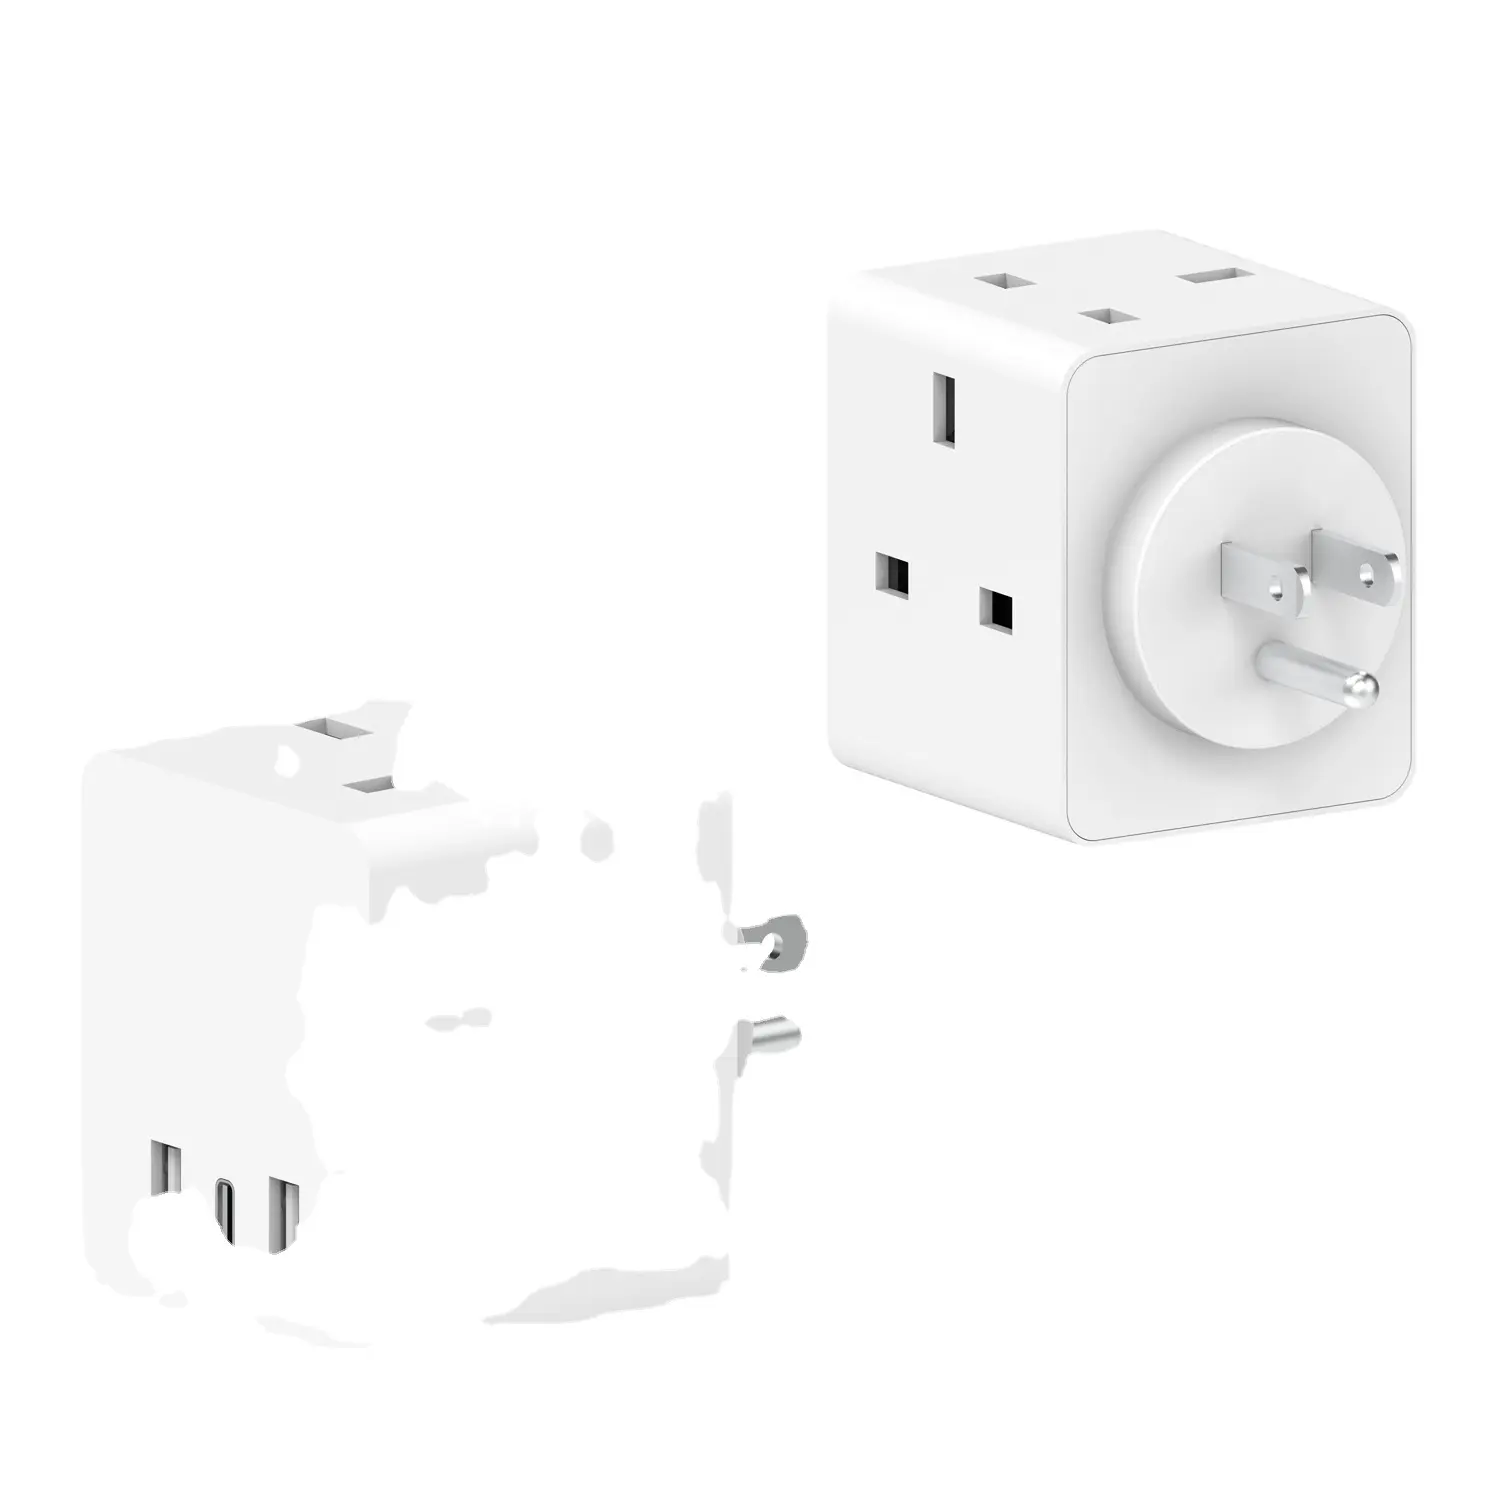 BS Standard 6 in 1 USB Multi Plug Cube Adaptor 3 UK Extender Outlets to US Plug Adapter With 3.4A Type-C Fast Charger